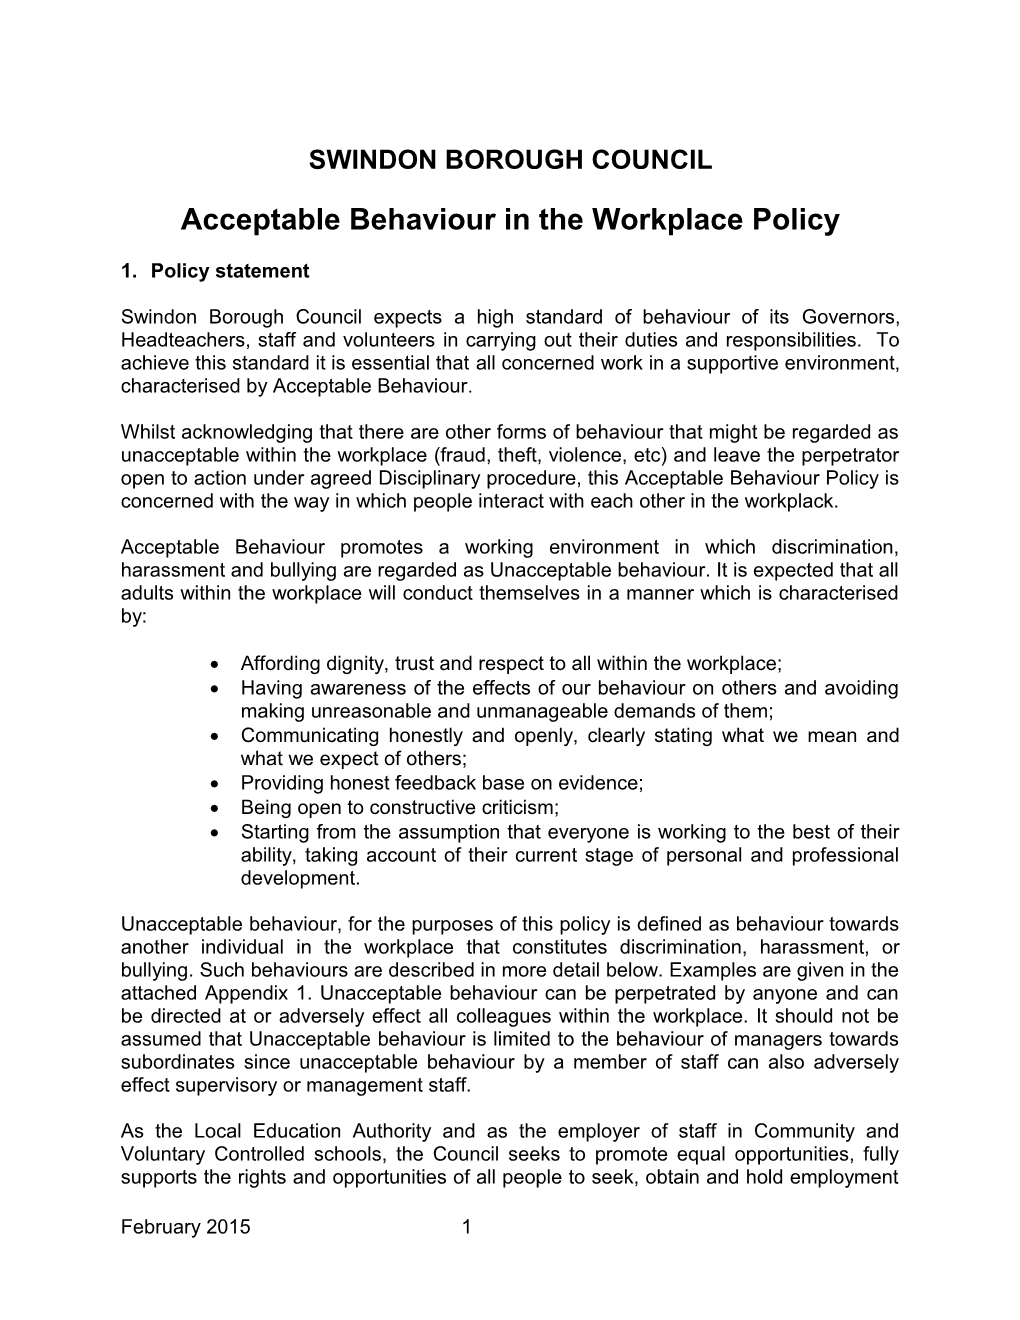 Acceptable Behaviour in the Workplace Policy